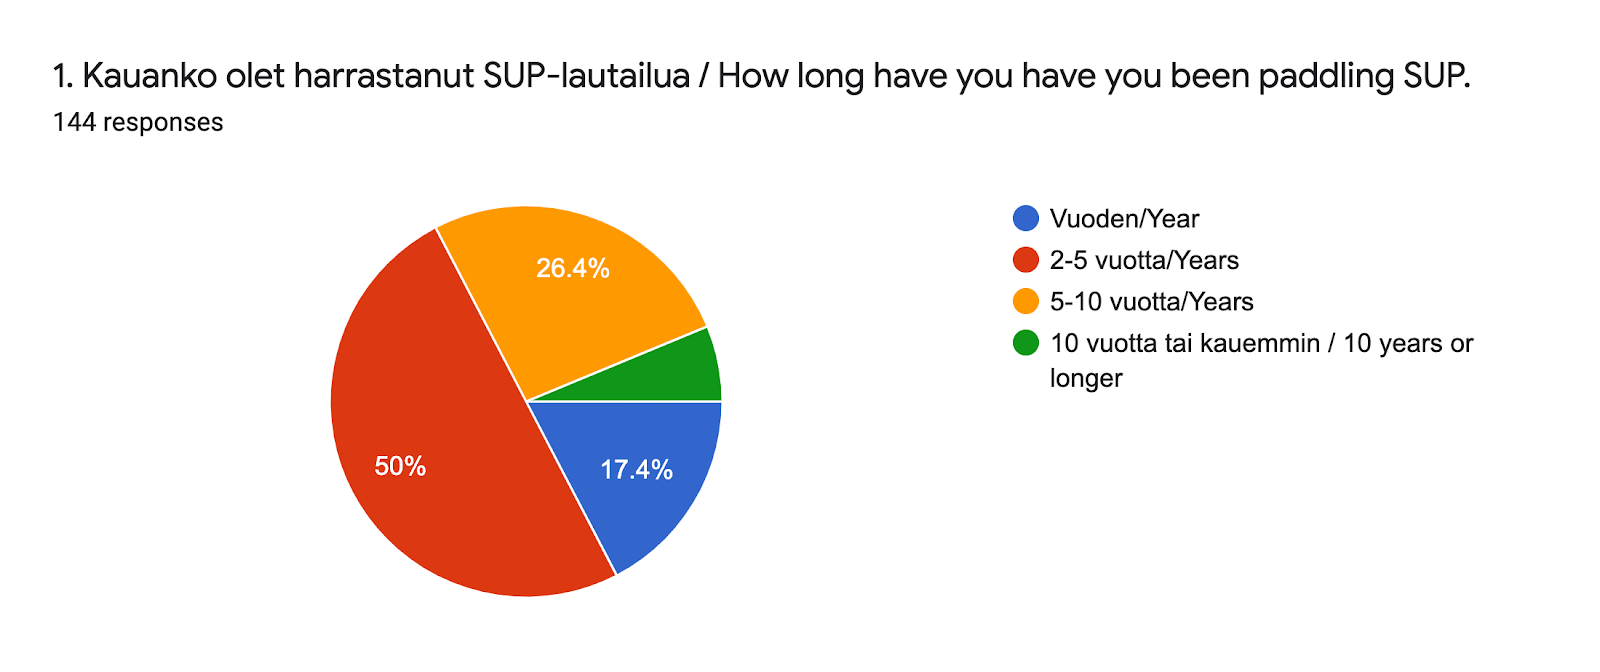 Forms response chart. Question title: 1. Kauanko olet harrastanut SUP-lautailua / How long have you have you been paddling SUP.. Number of responses: 144 responses.